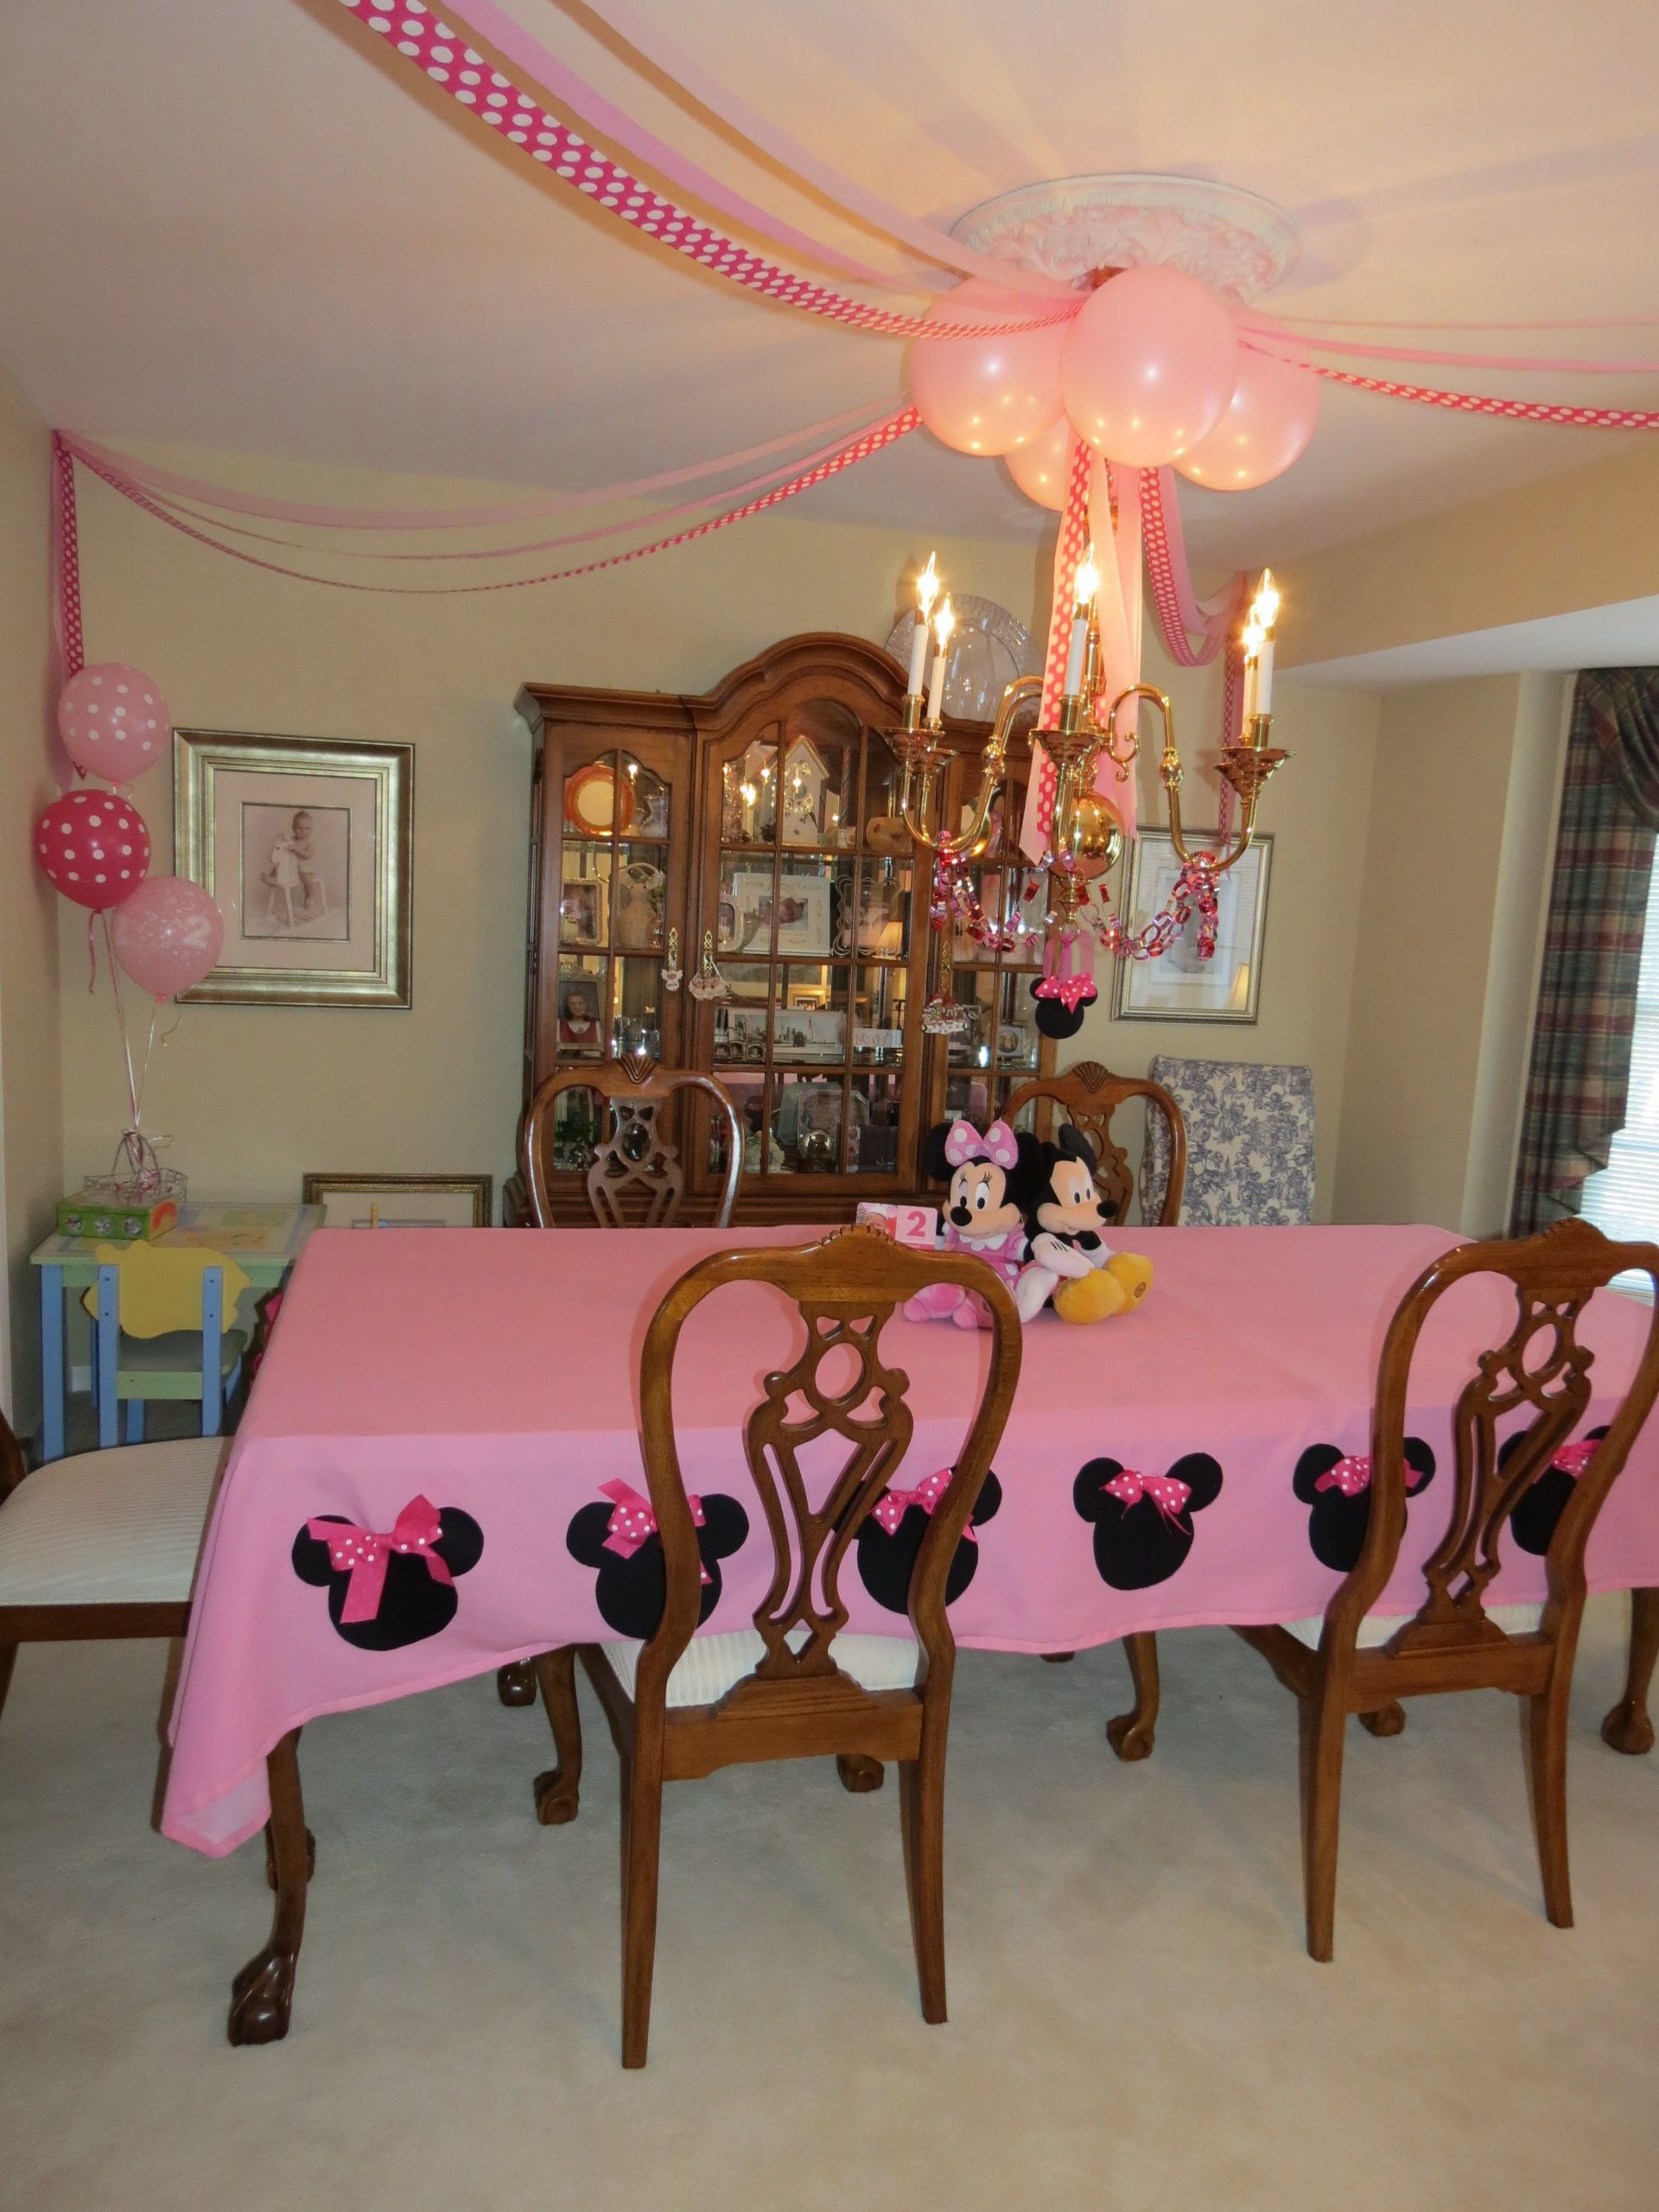 DIY Minnie Mouse Party Decorations
 diyminnie mouse party ideas